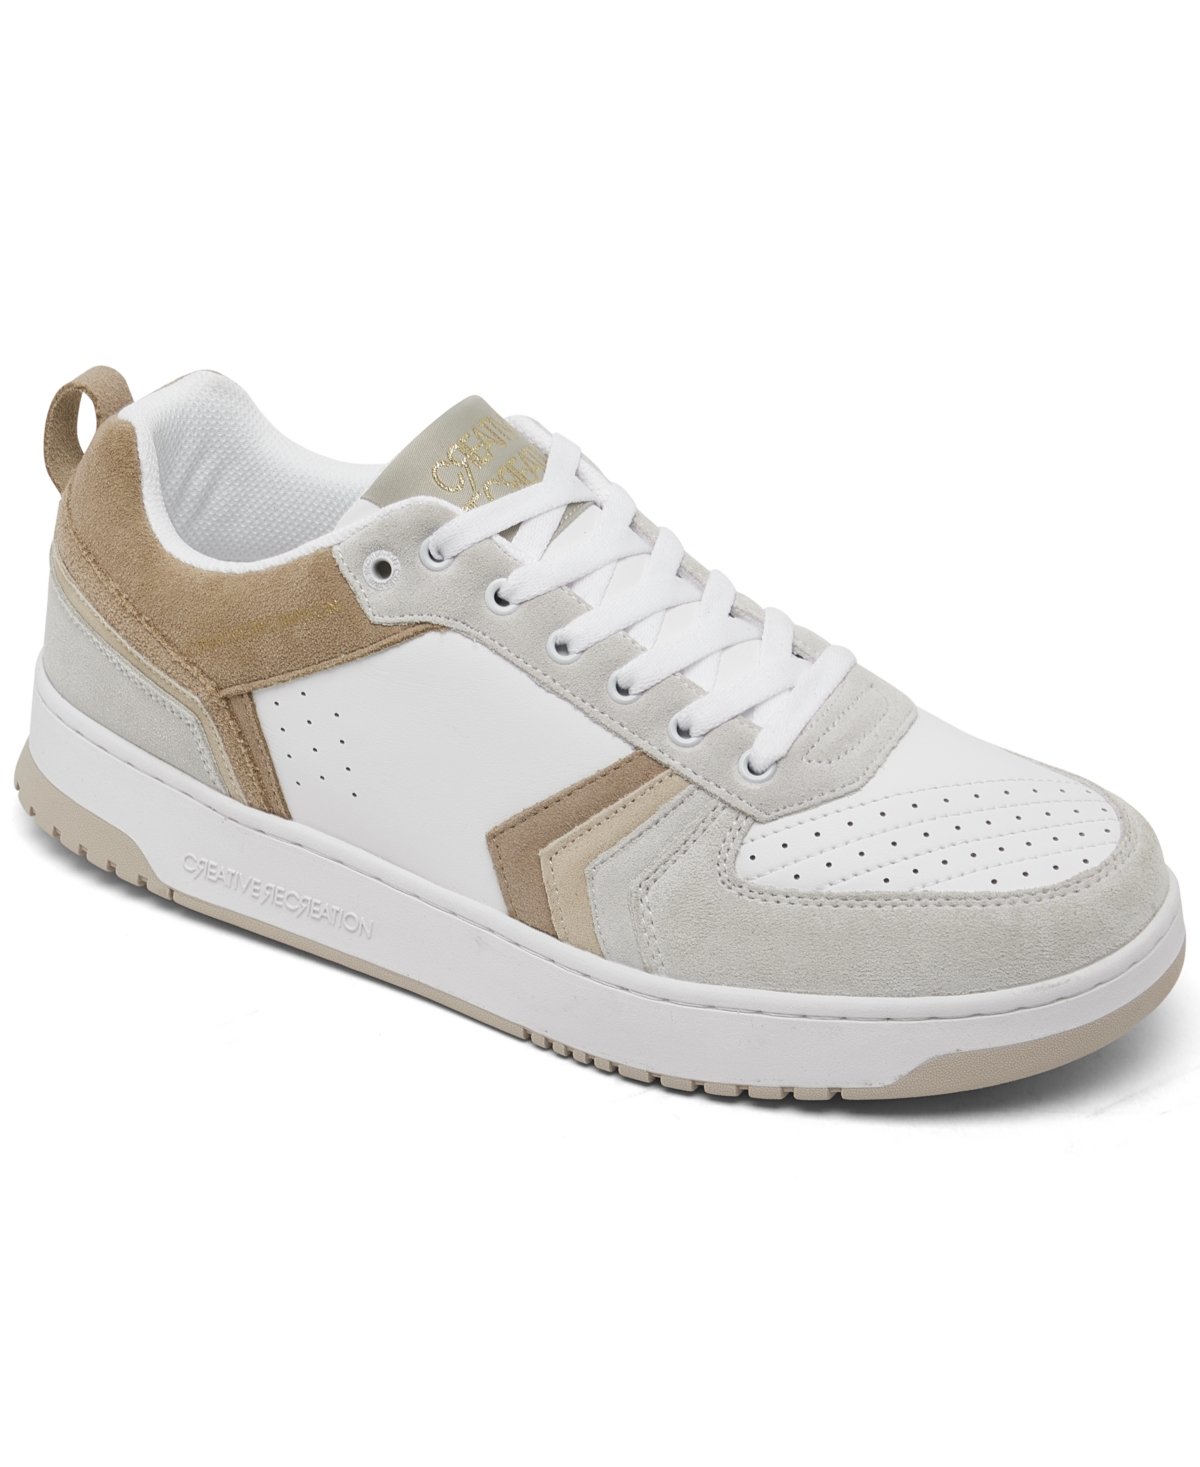 Creative Recreation Men's Calix Casual Sneakers from Finish Line